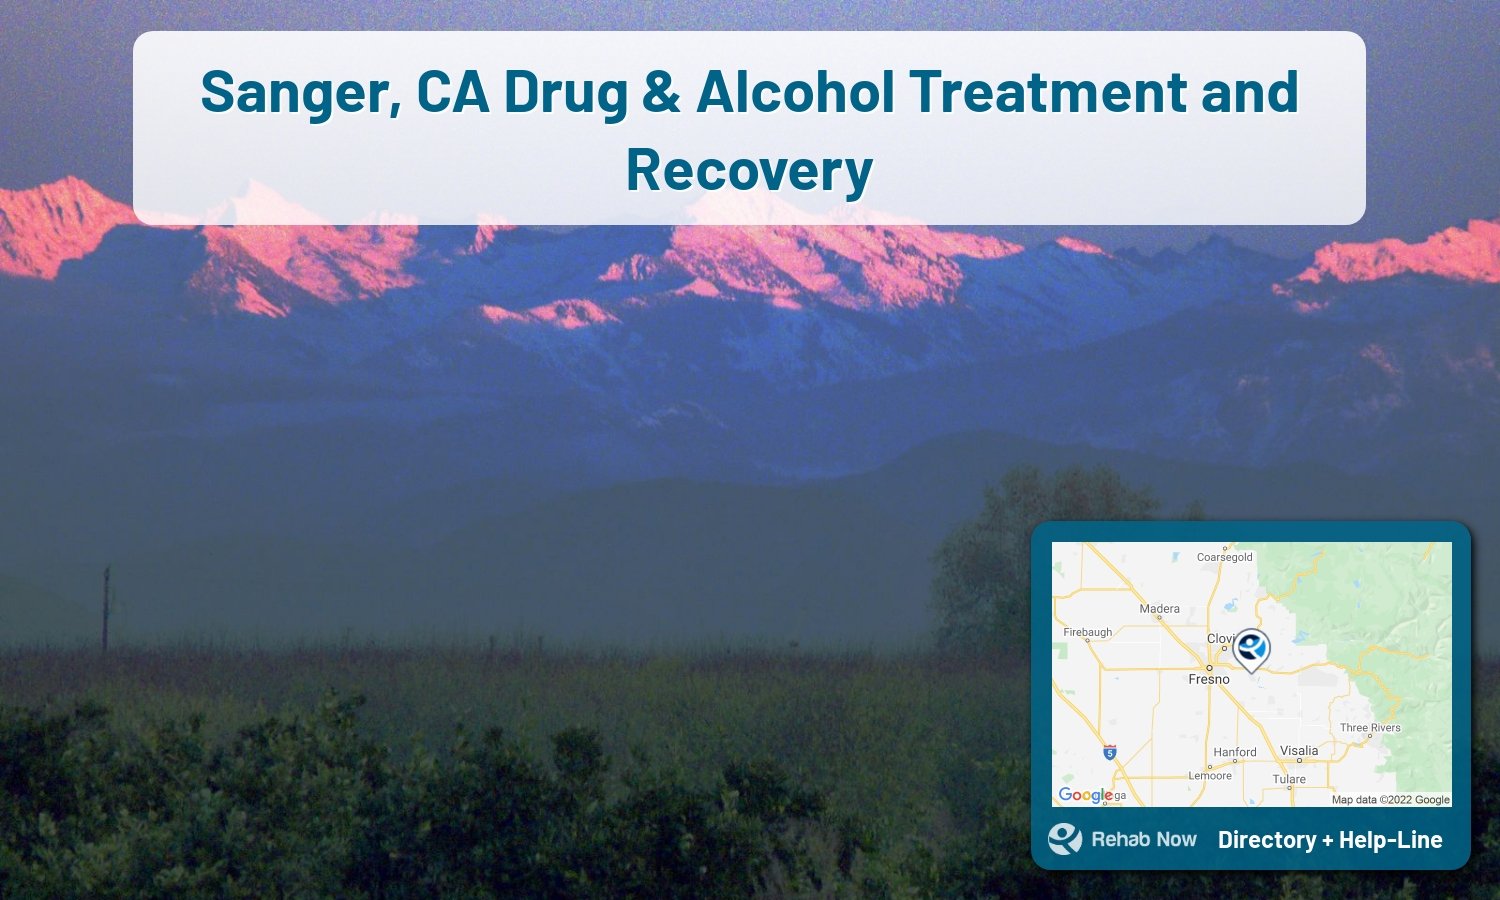 List of alcohol and drug treatment centers near you in Sanger, California. Research certifications, programs, methods, pricing, and more.